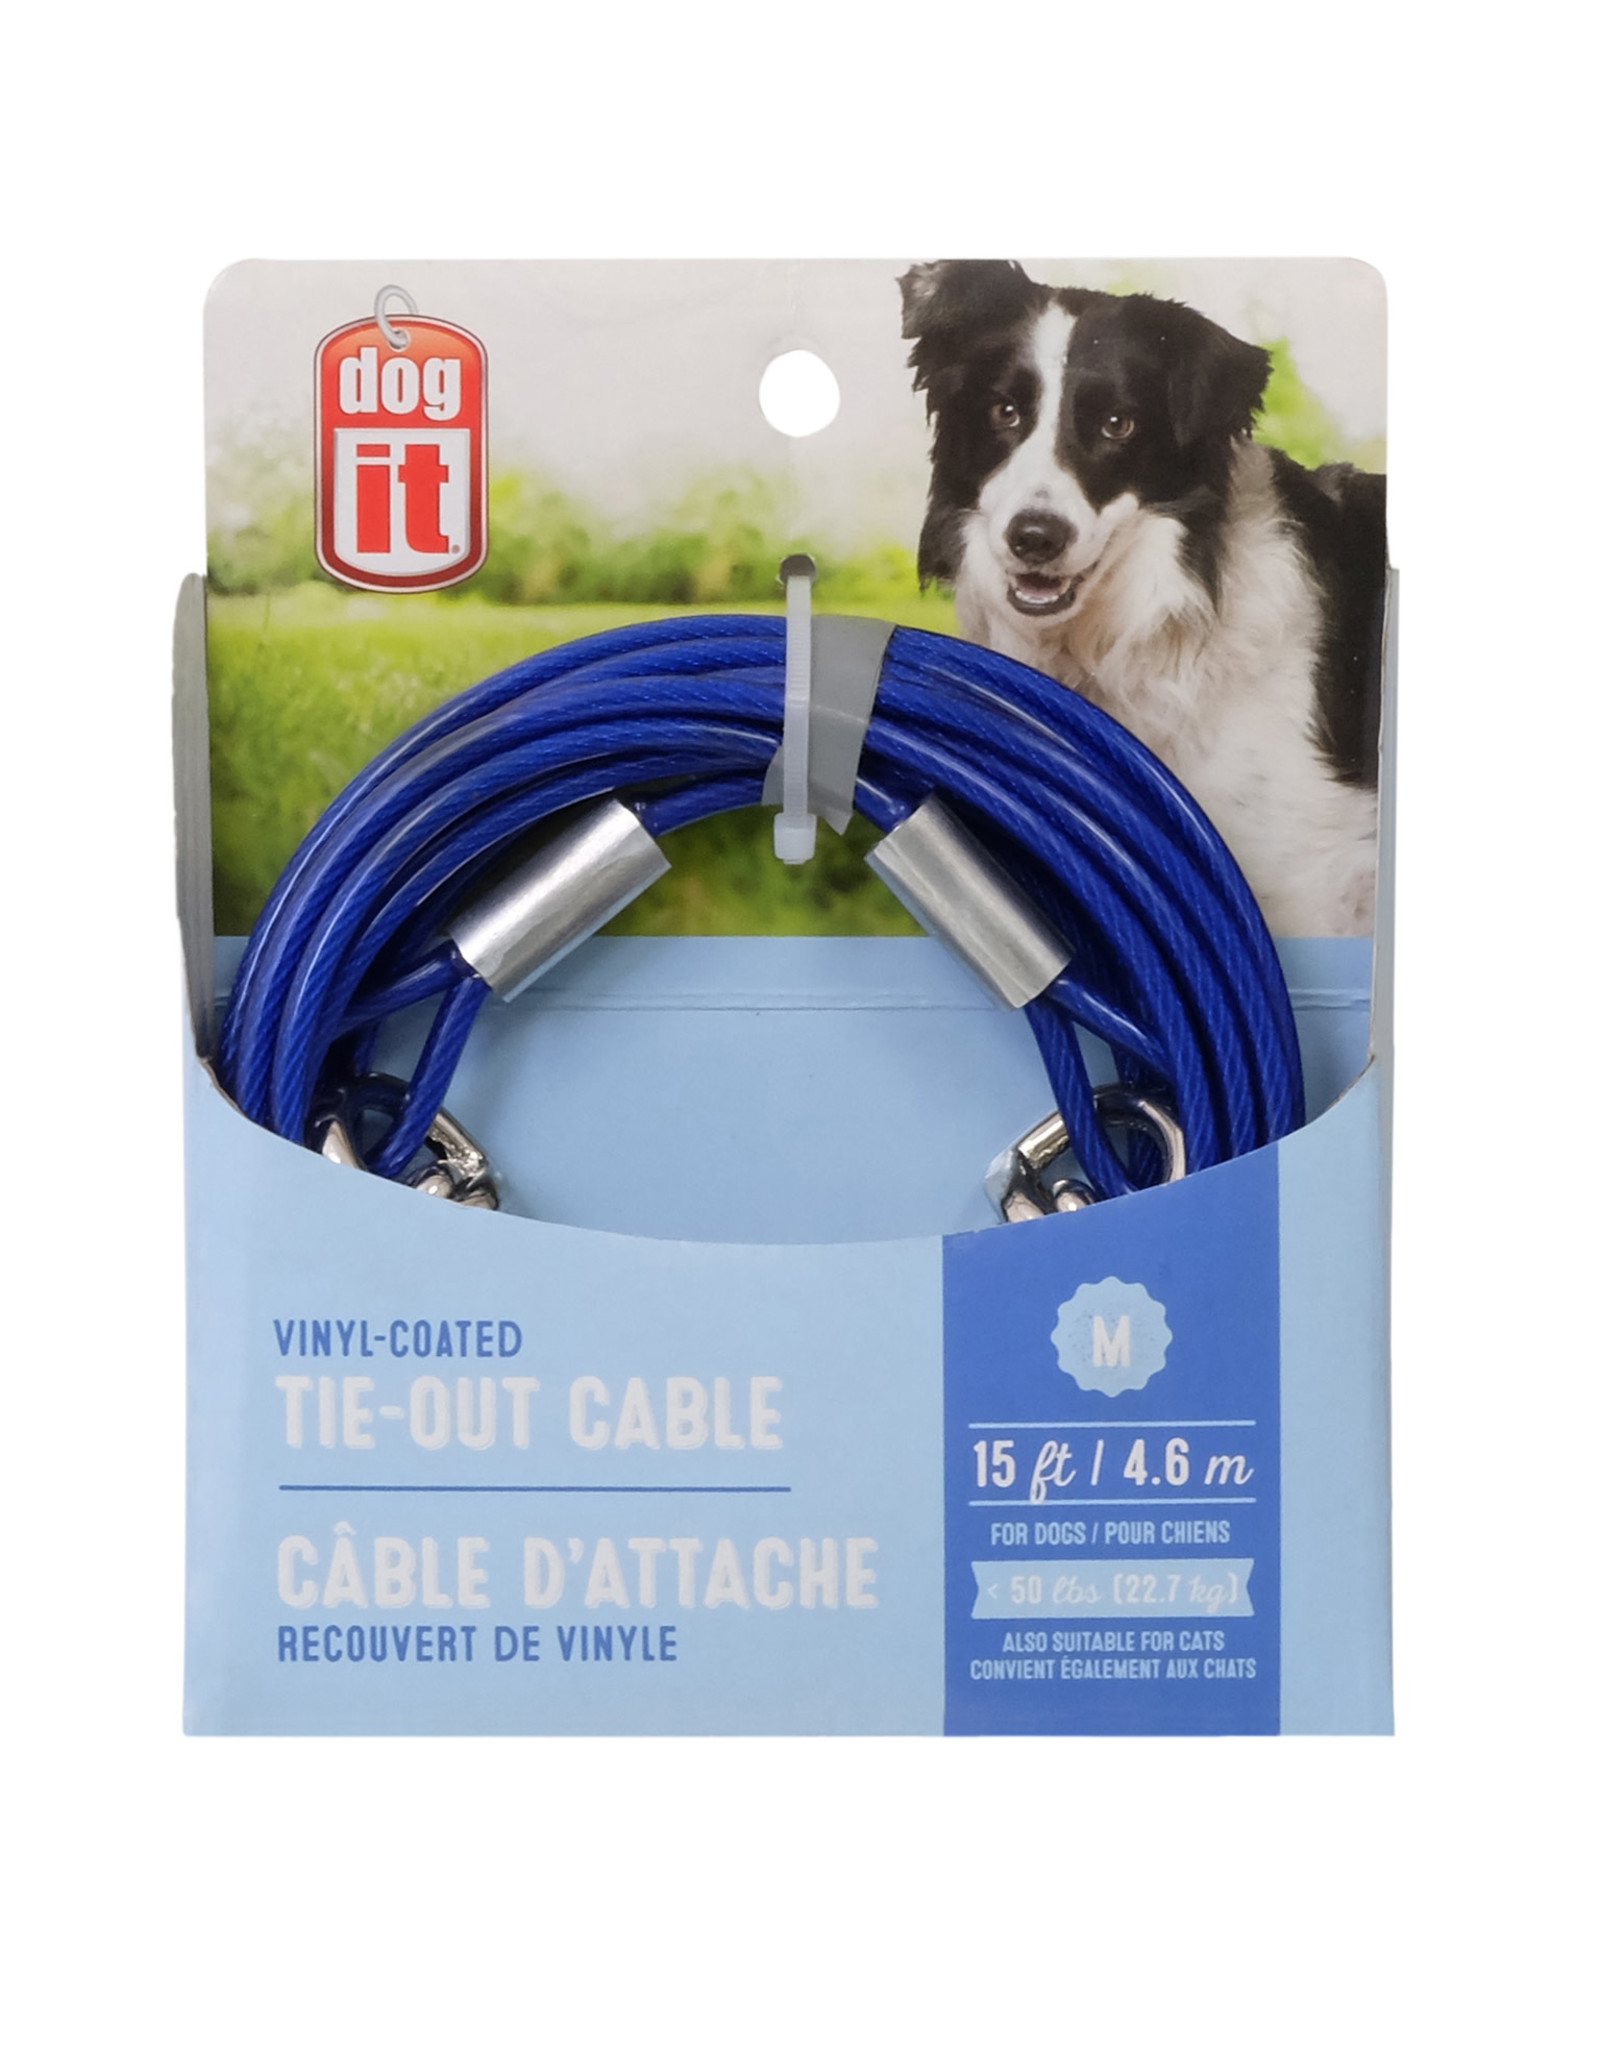 DogIt Dog Tether Tie-out Cable Blue Medium 4.6m (15')